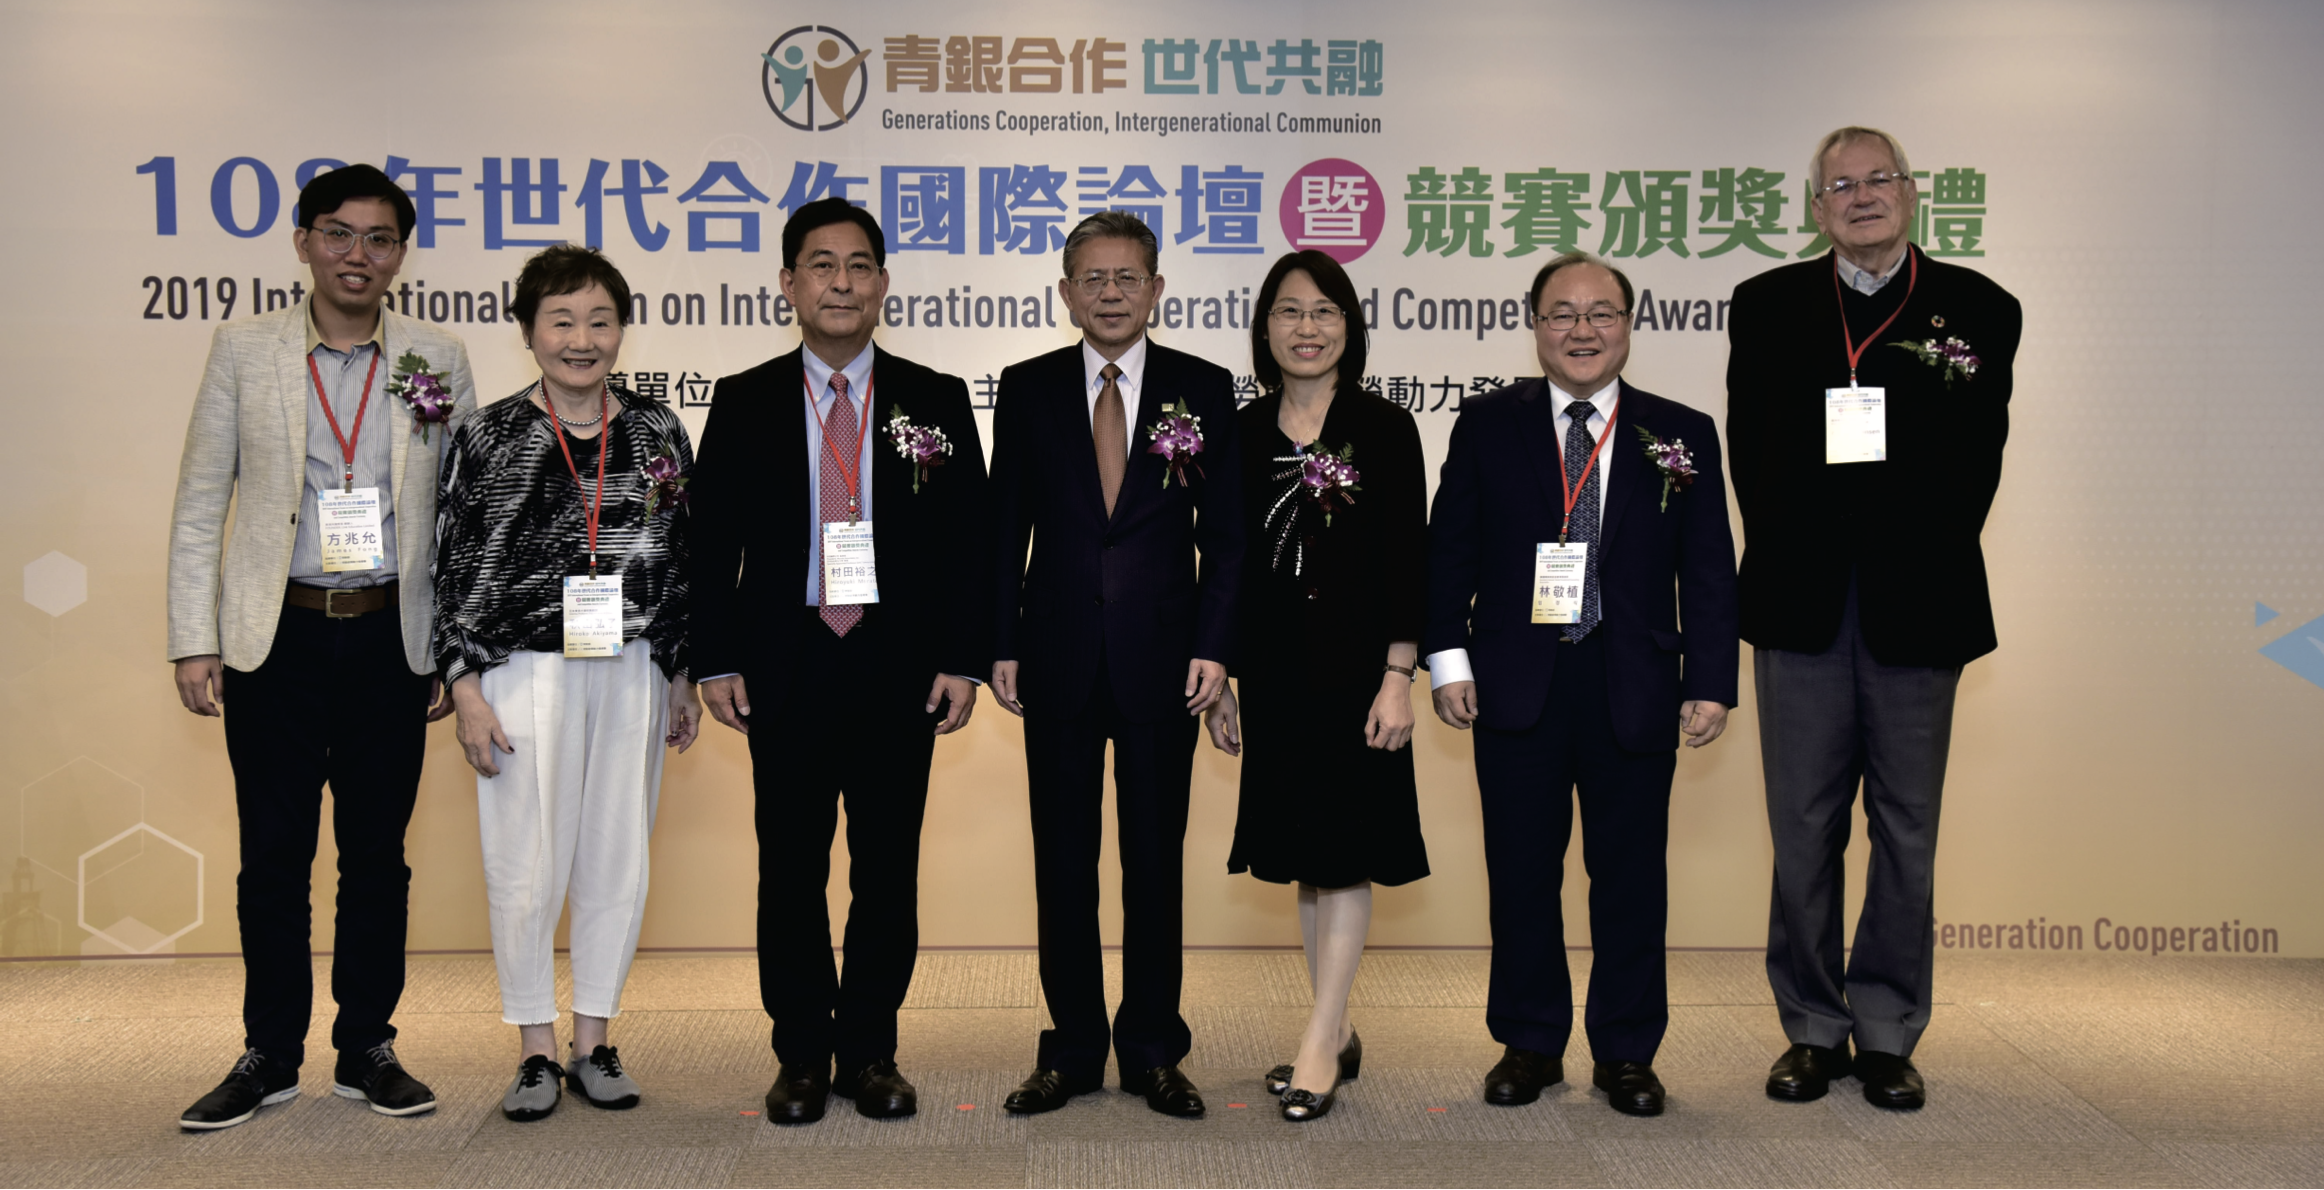 Ministry of Labor holds International Forum on Intergenerational Cooperation to create age-integrated, friendly workplaces